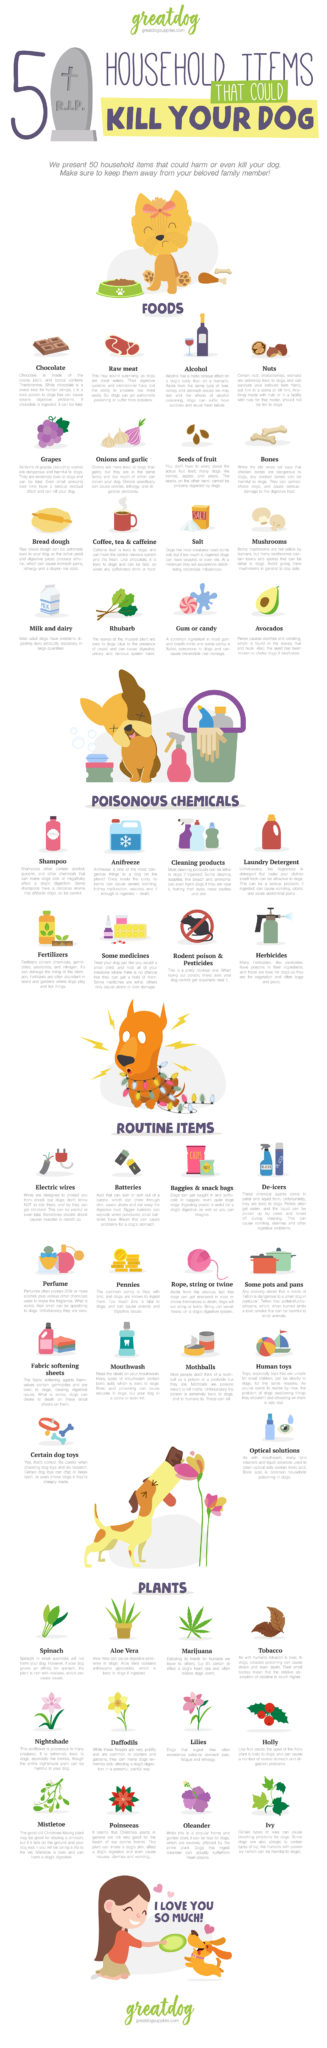 50 Household Items that Could Kill Your Dog - Infographic